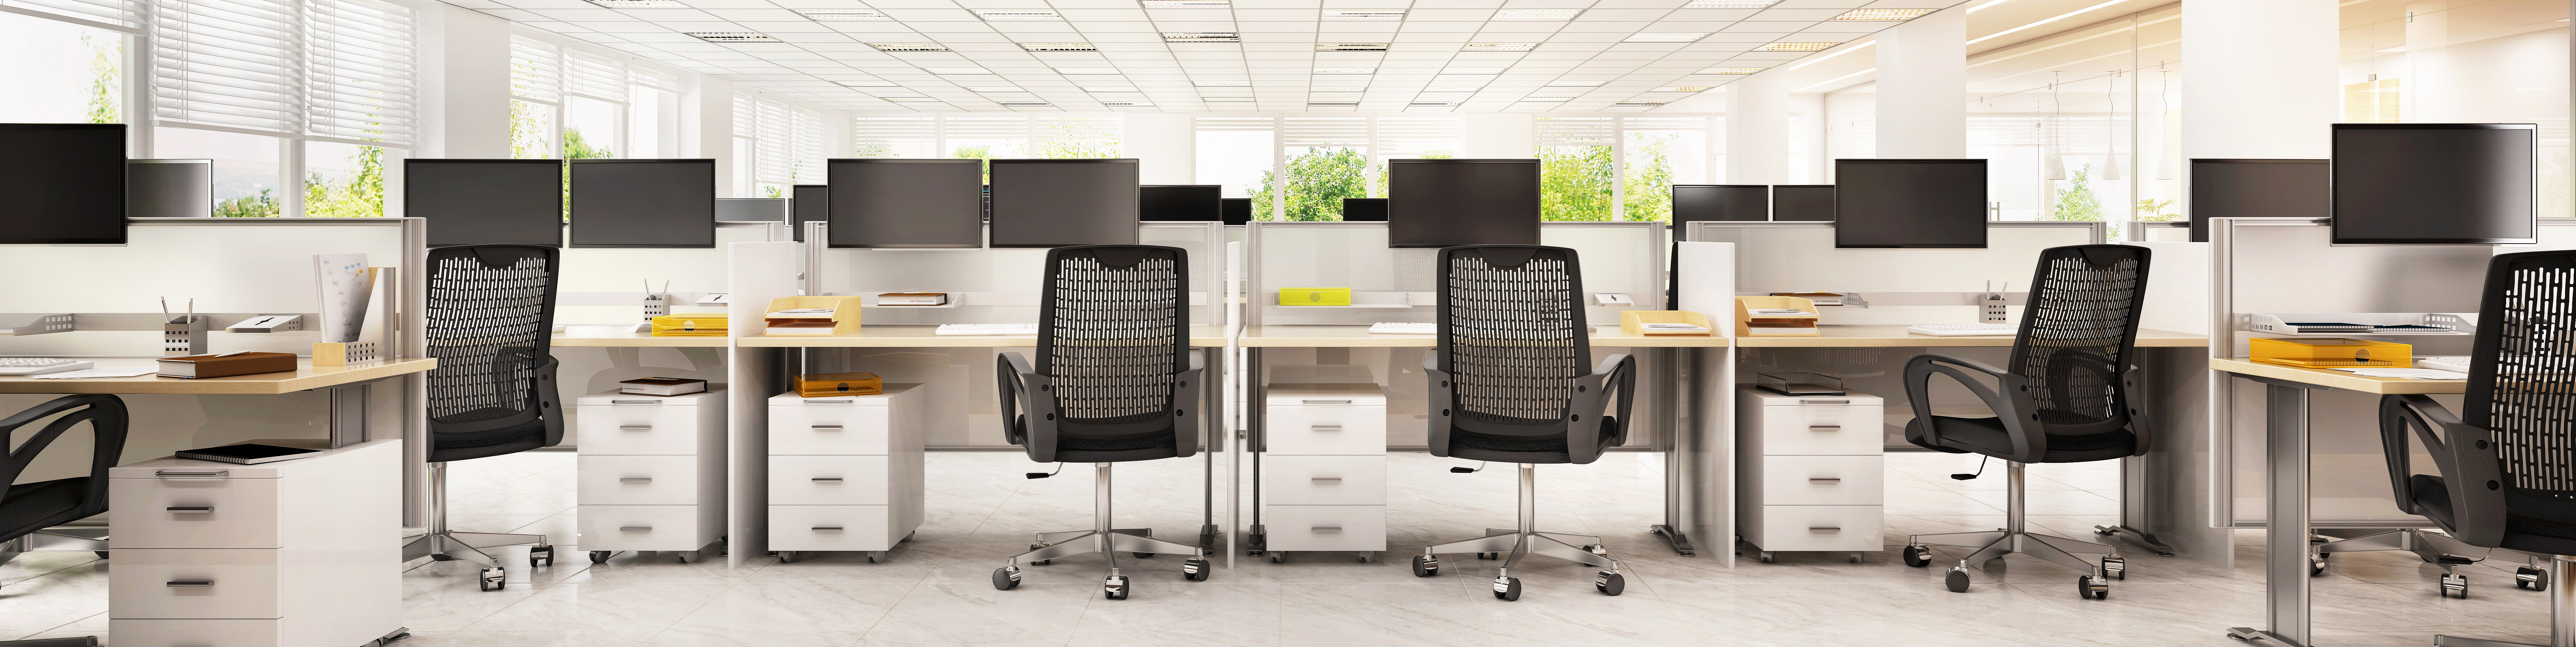 Workplace with mesh office chairs 